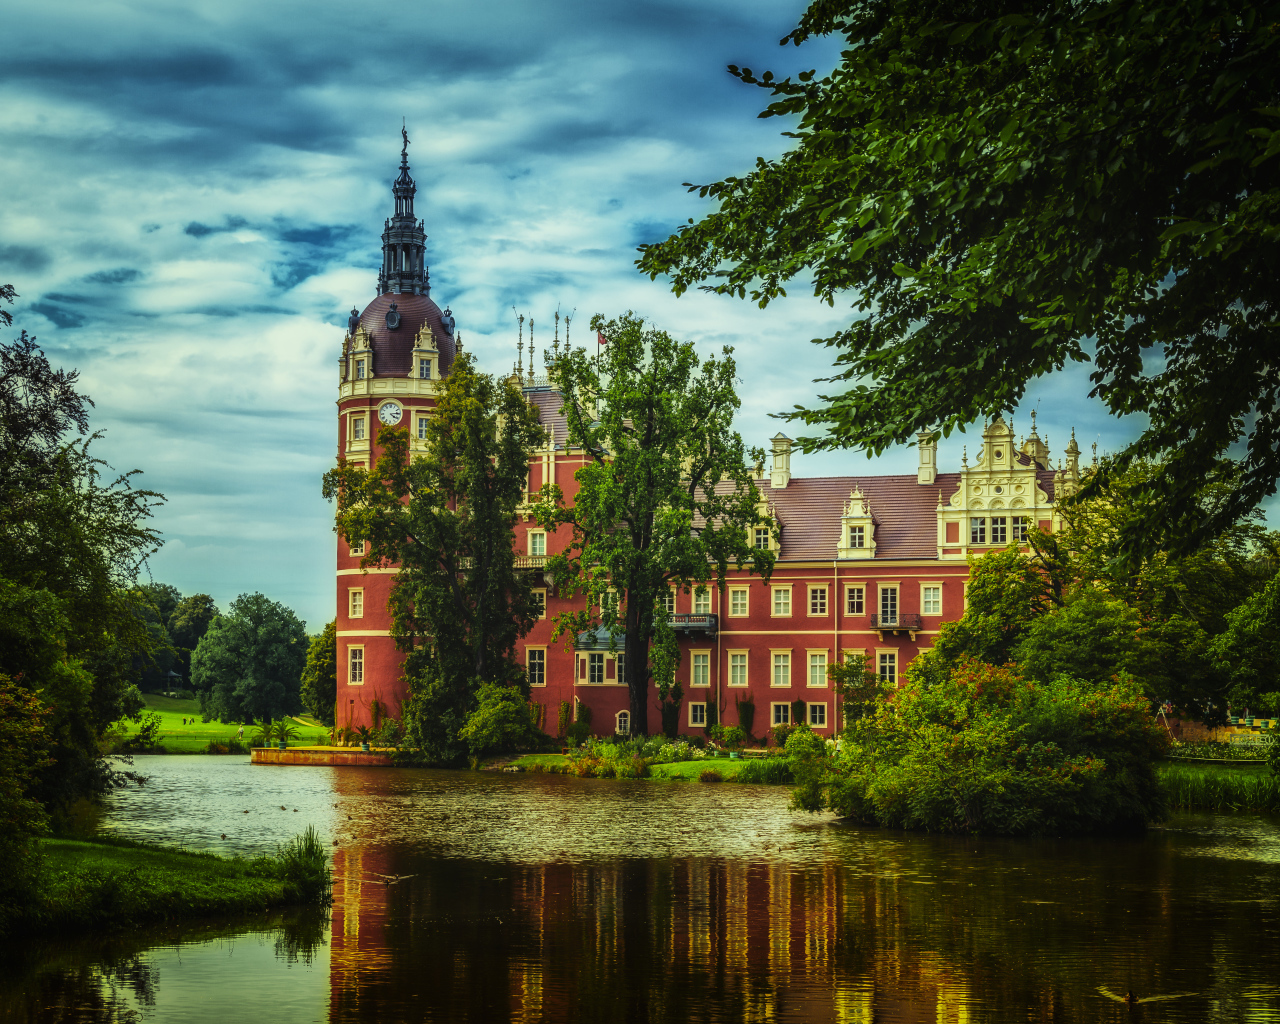 Ancient castle Moritzburg by the pond, Germany